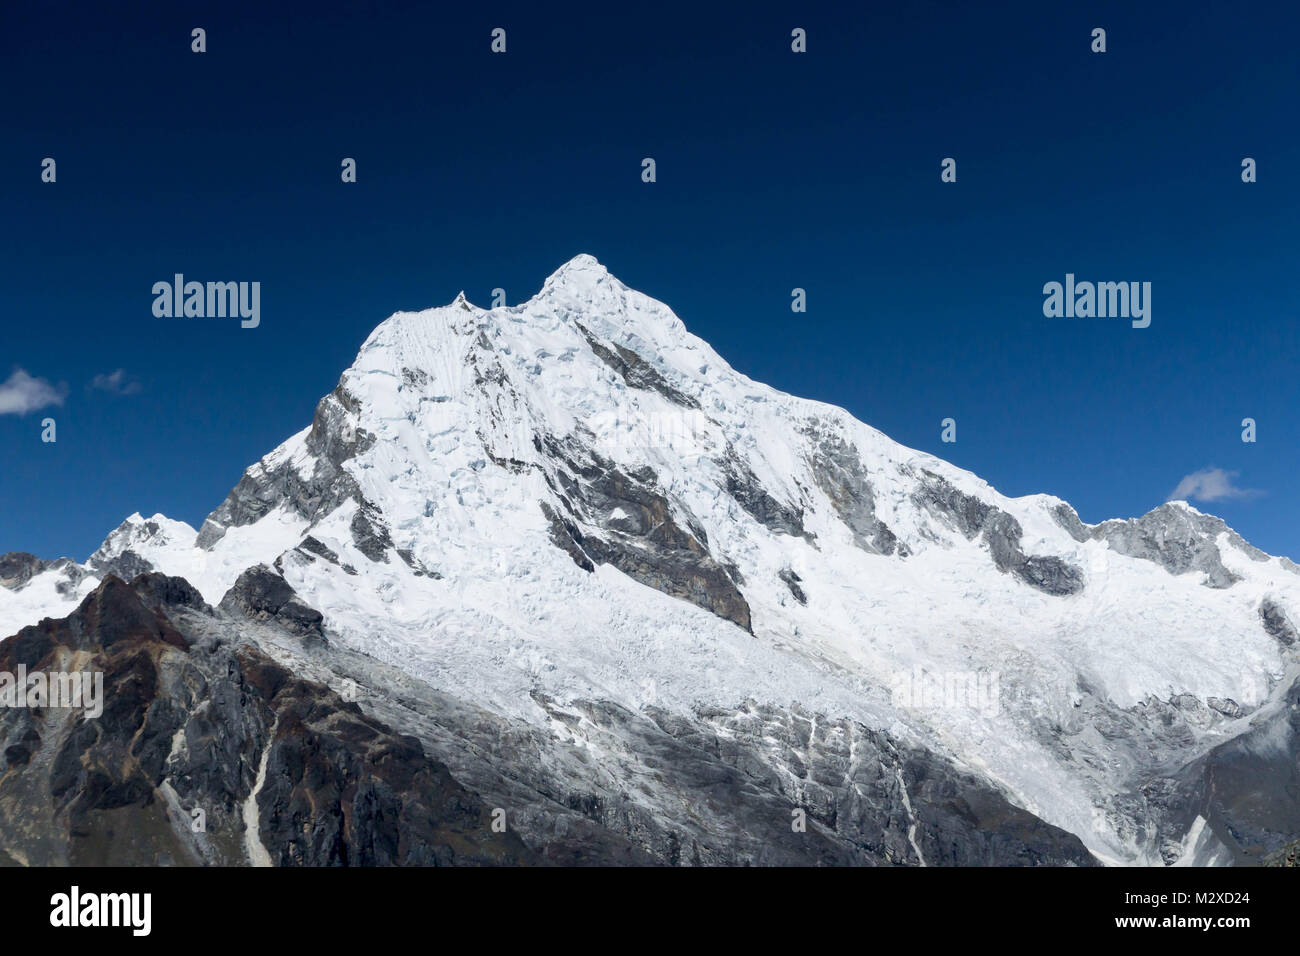 high snow-capped mountain peak landscape in the Cordillera Blanca in the Peruvian Andes Stock Photo